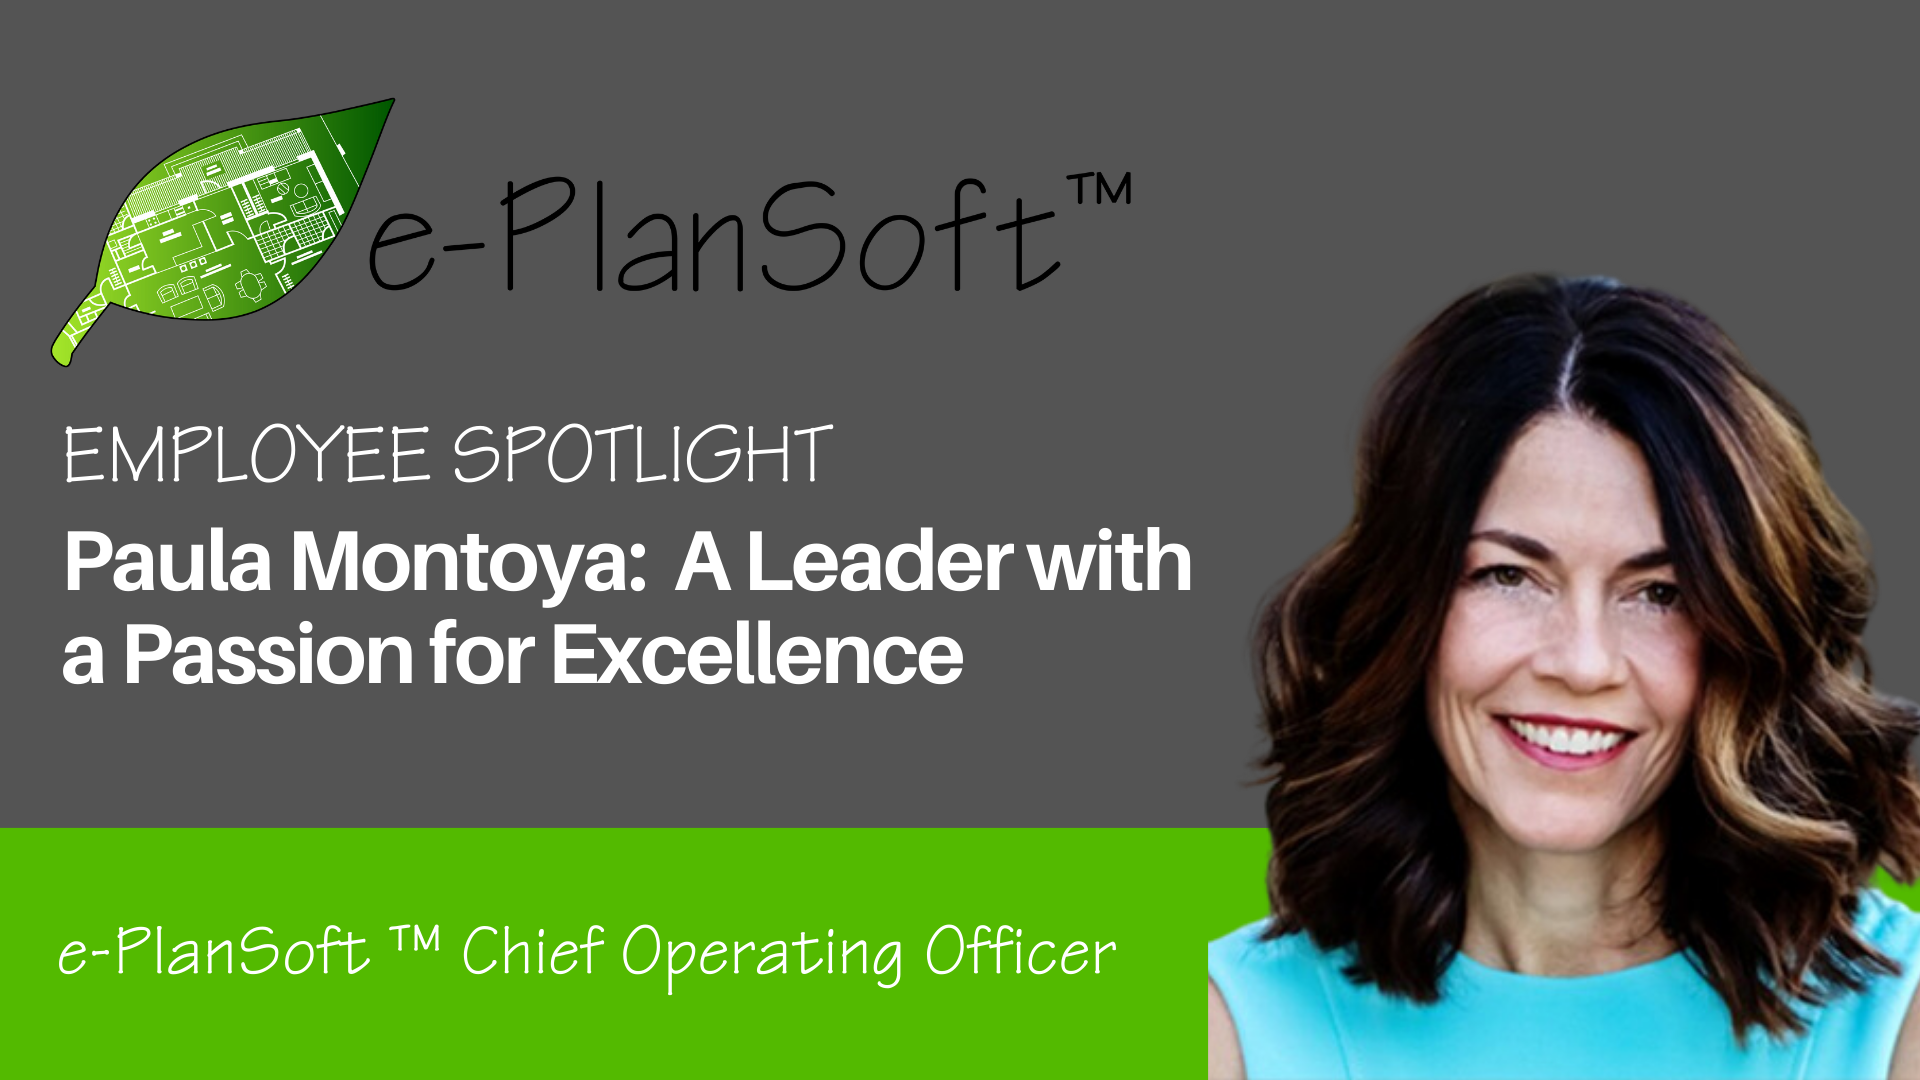 Employee Spotlight on e-PlanSoft™ Chief Operating Officer Paula Montoya: A Leader with a Passion for Excellence